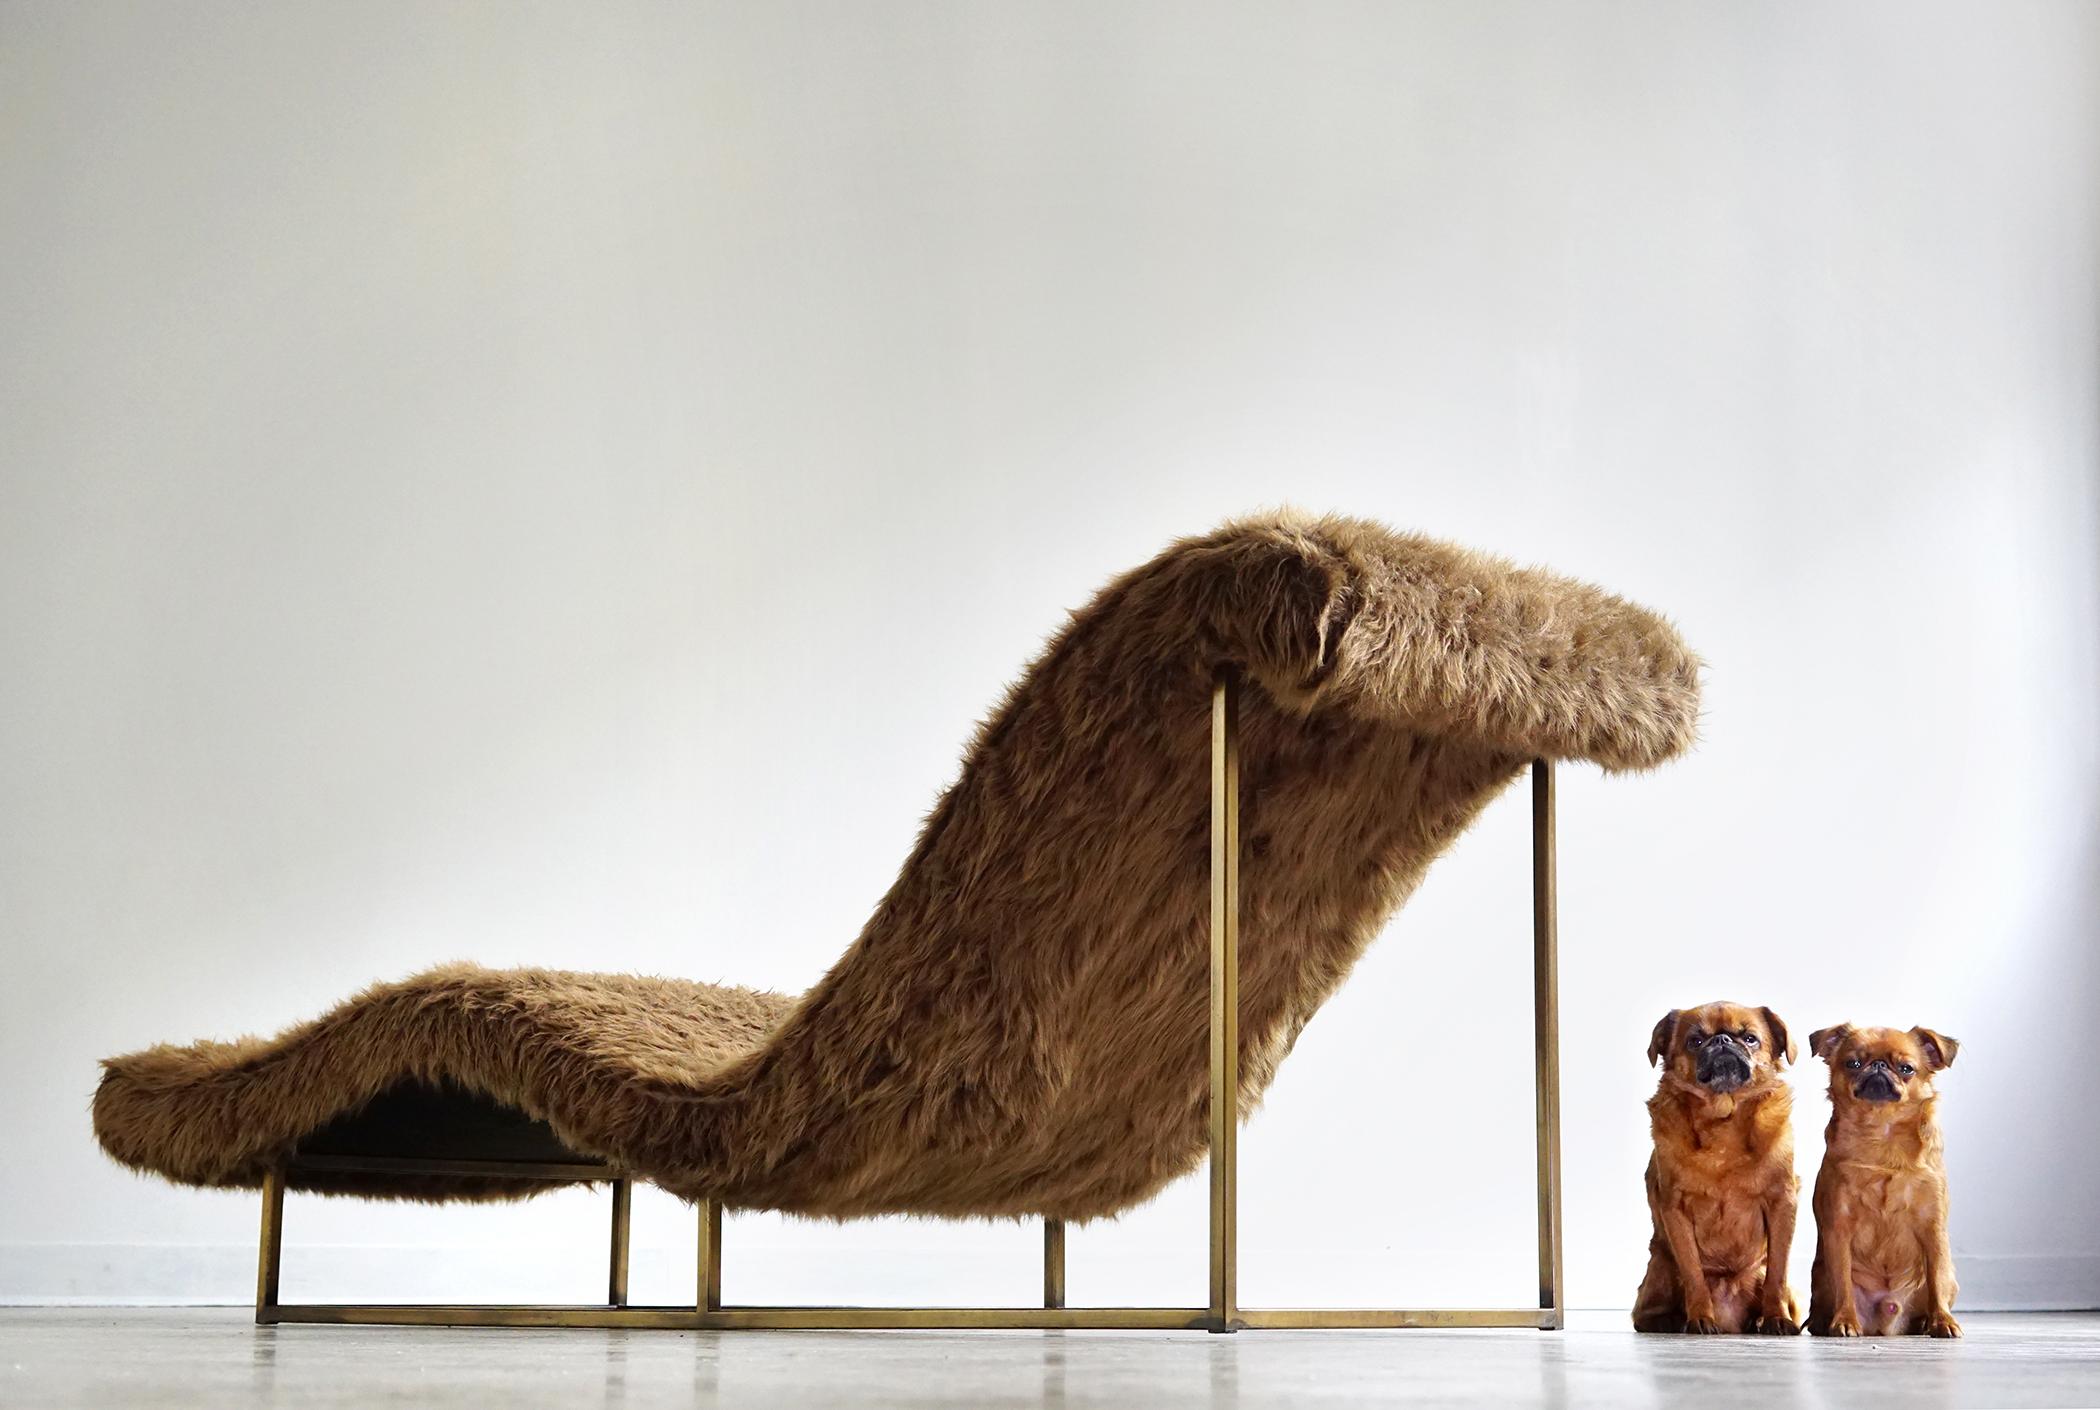 For your consideration is what many consider the holy grail of Milo Baughman designs in all-original museum quality condition featuring its original 1960s faux fur shag upholstery, sculptural sinuous form, slim steel tube frame with rare bronze tone